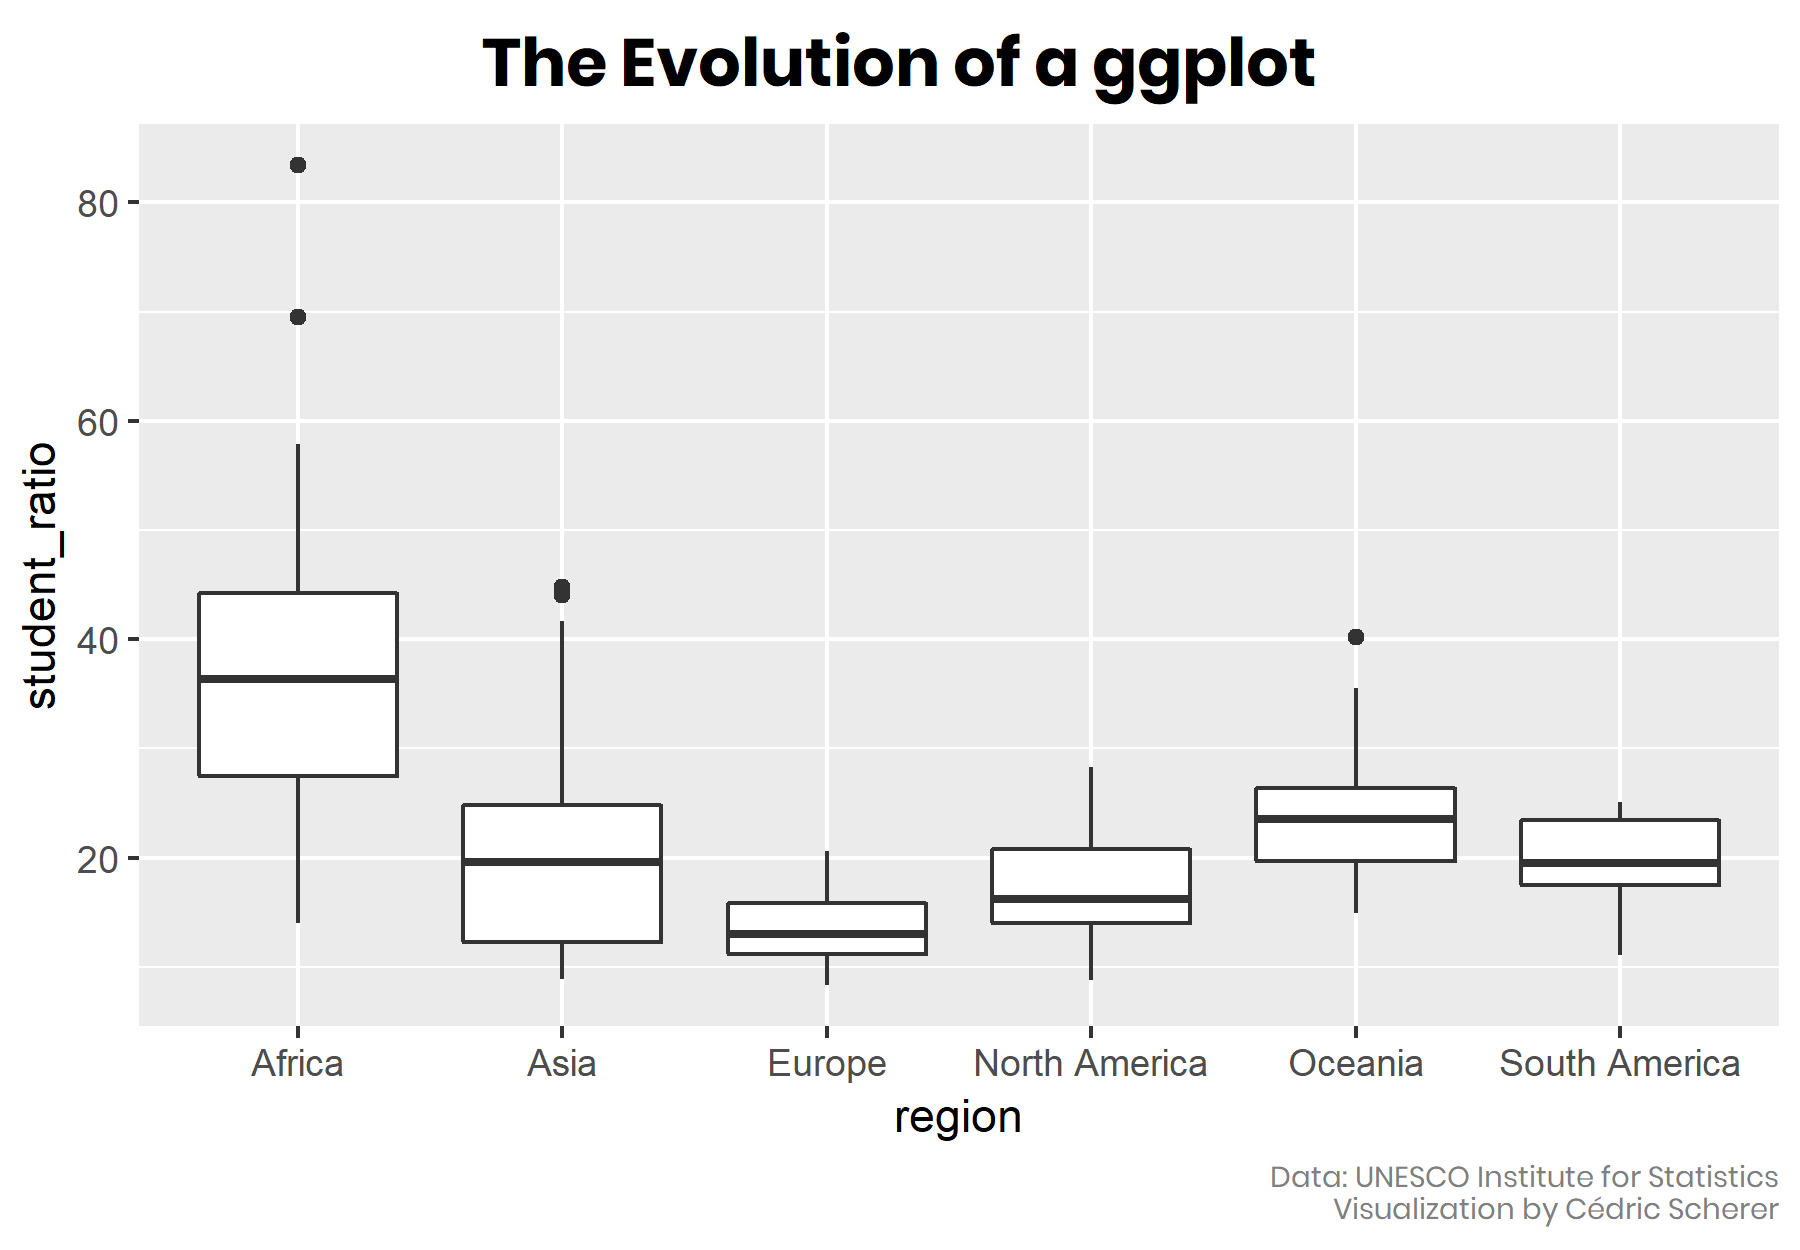 Evolution of a ggplot, by Cedric Scherer shows how one can progressively refine and customize a gpplot.